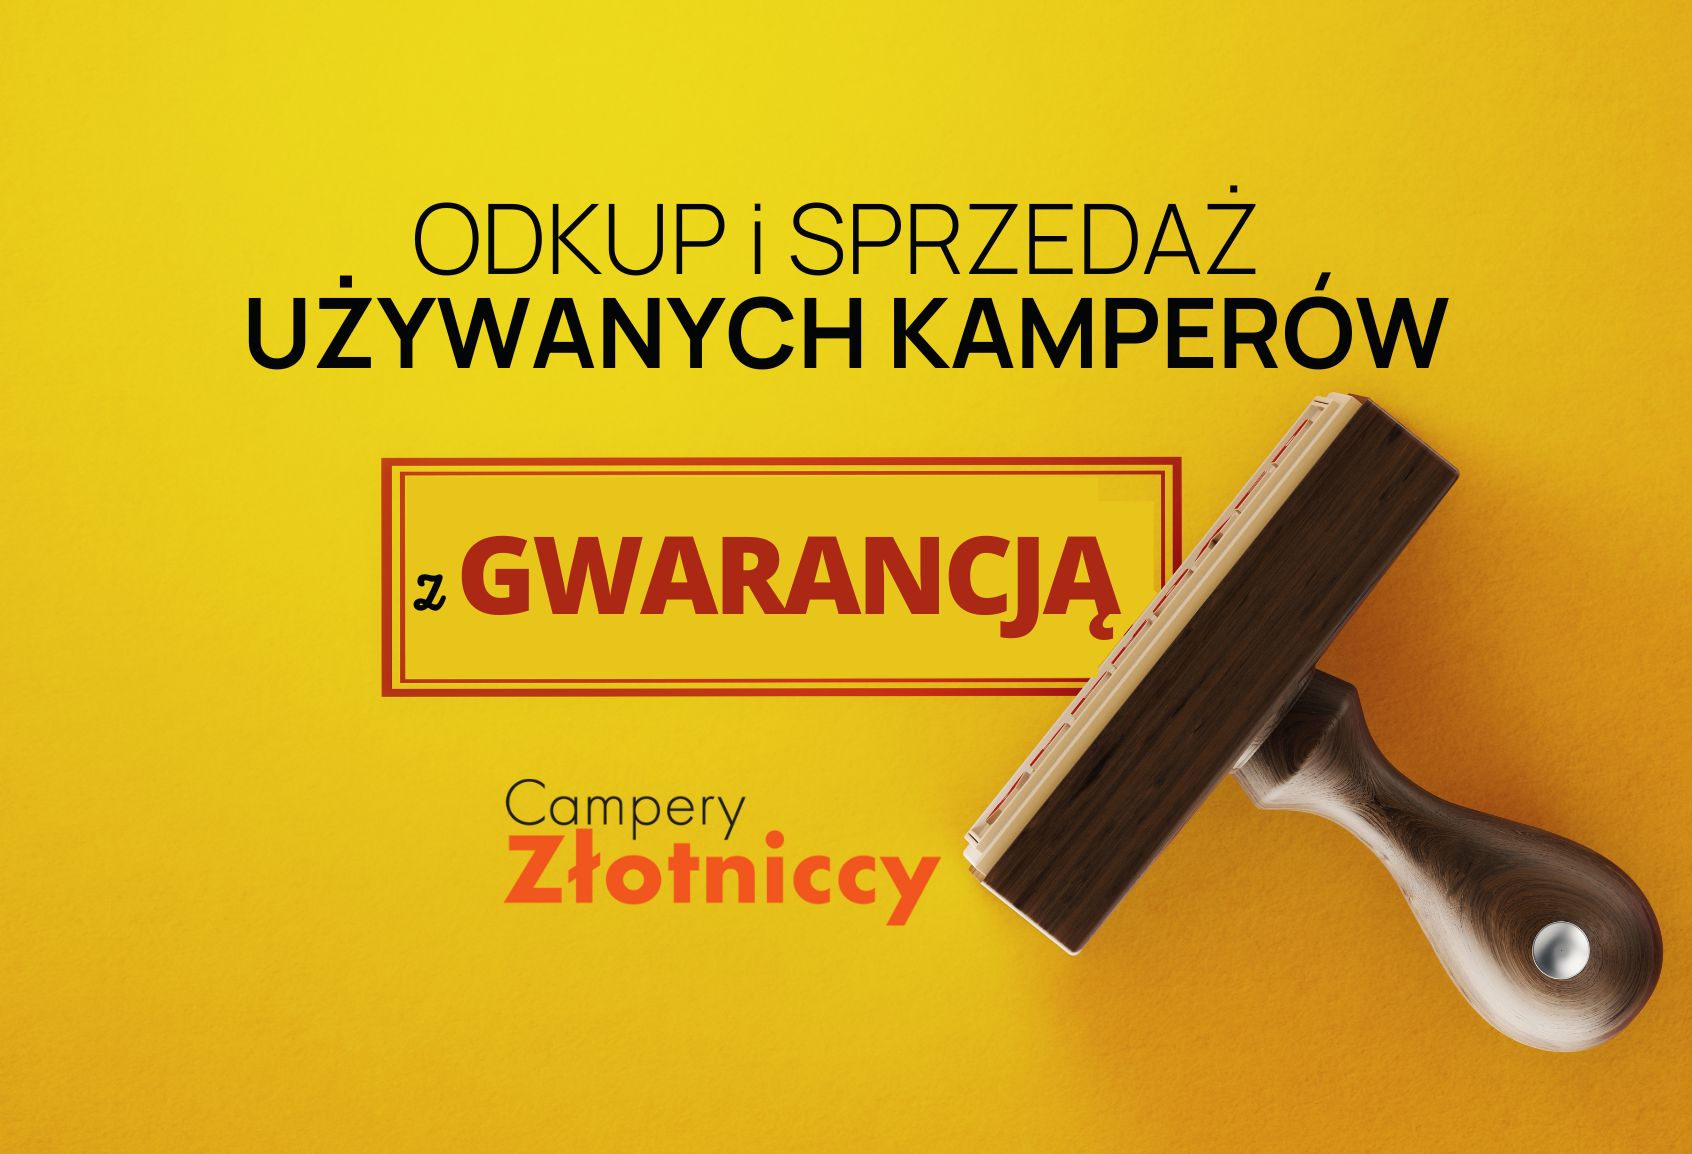 Złotniccy motorhomes face new challenges – main image